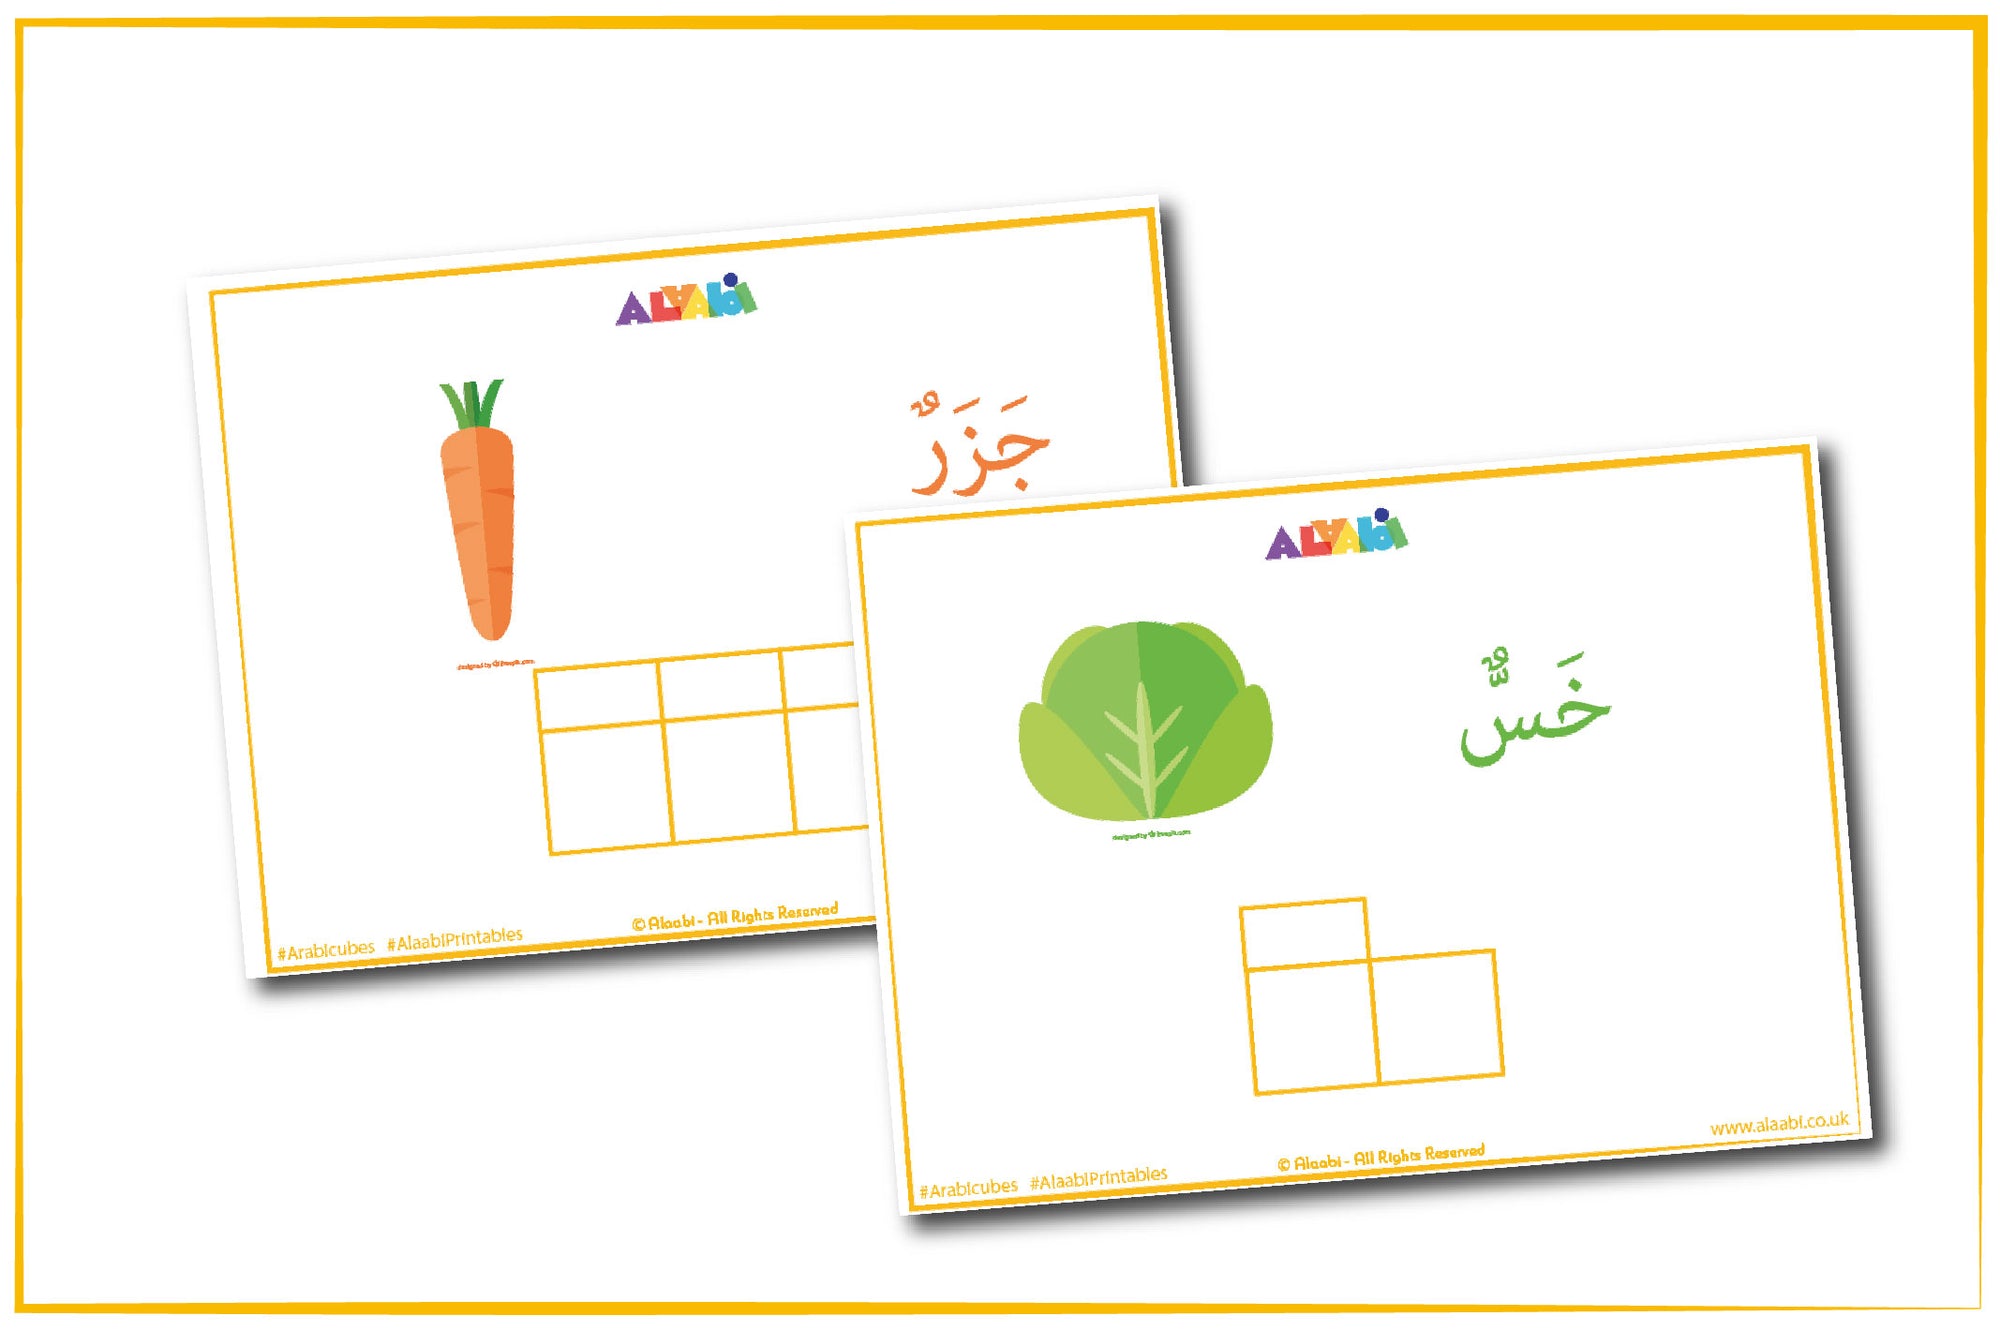 My First Arabic Words: Vegetables